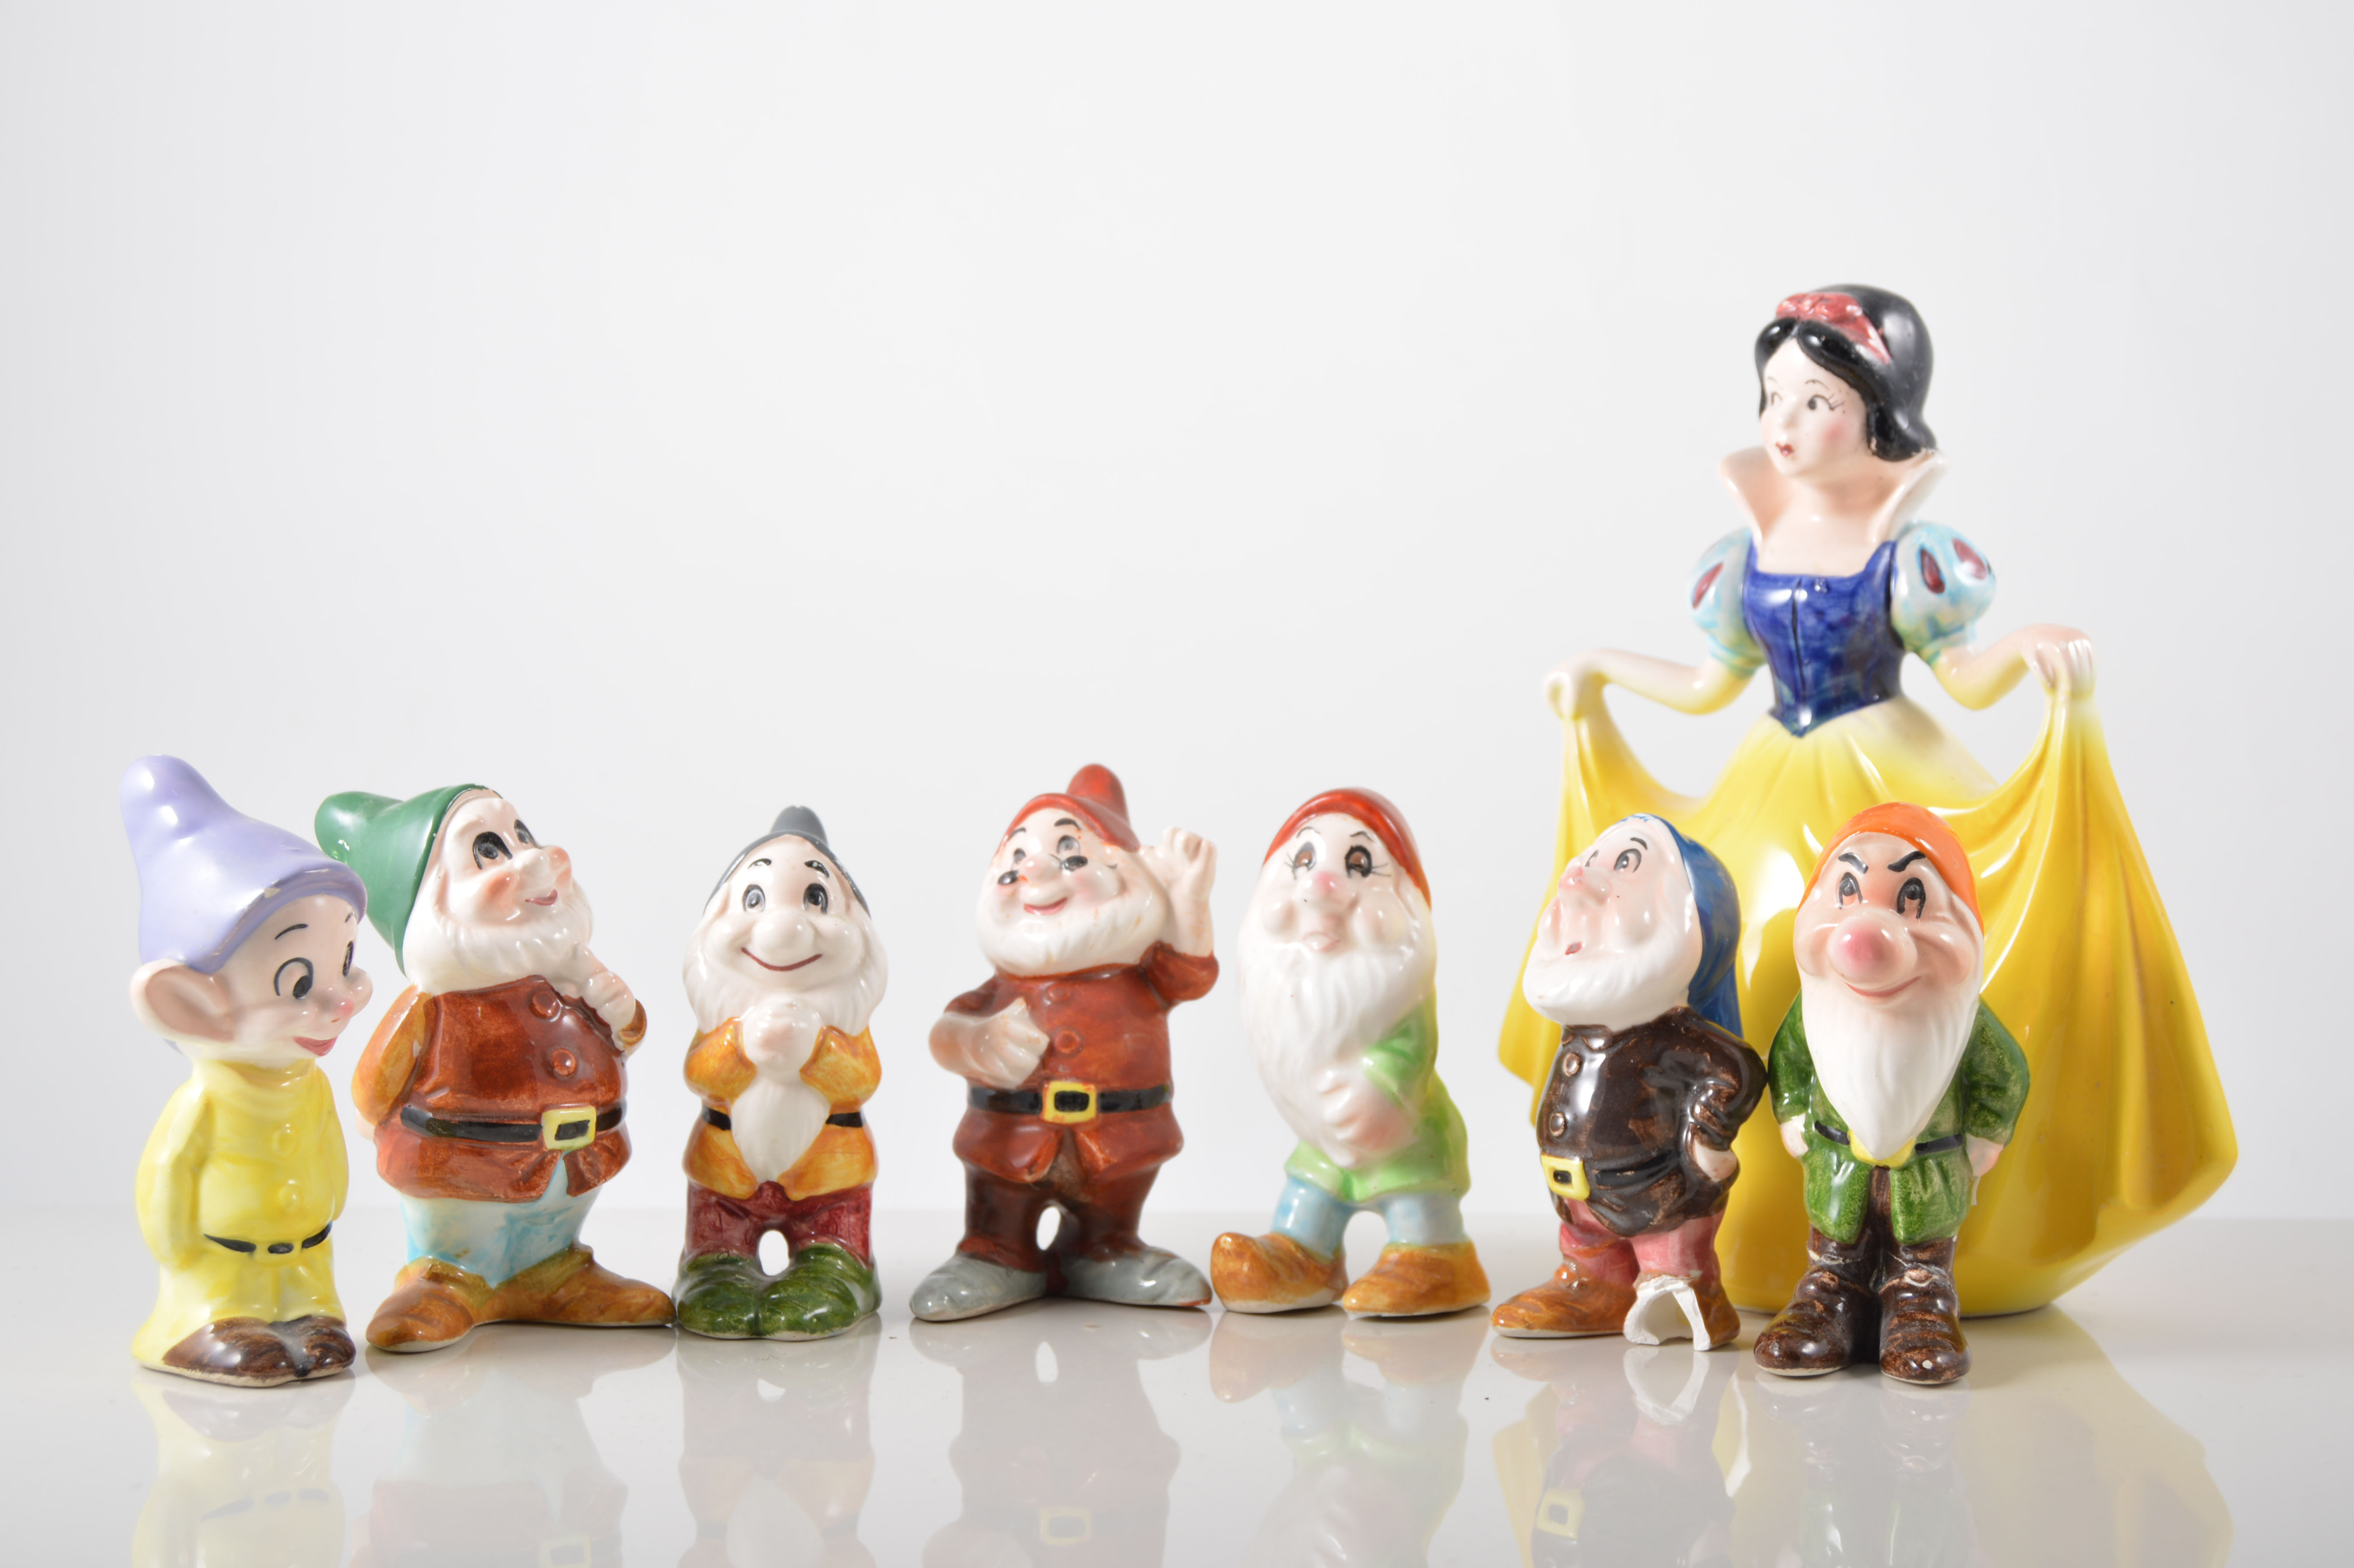 Japanese set of Snow White and the seven dwarfs.